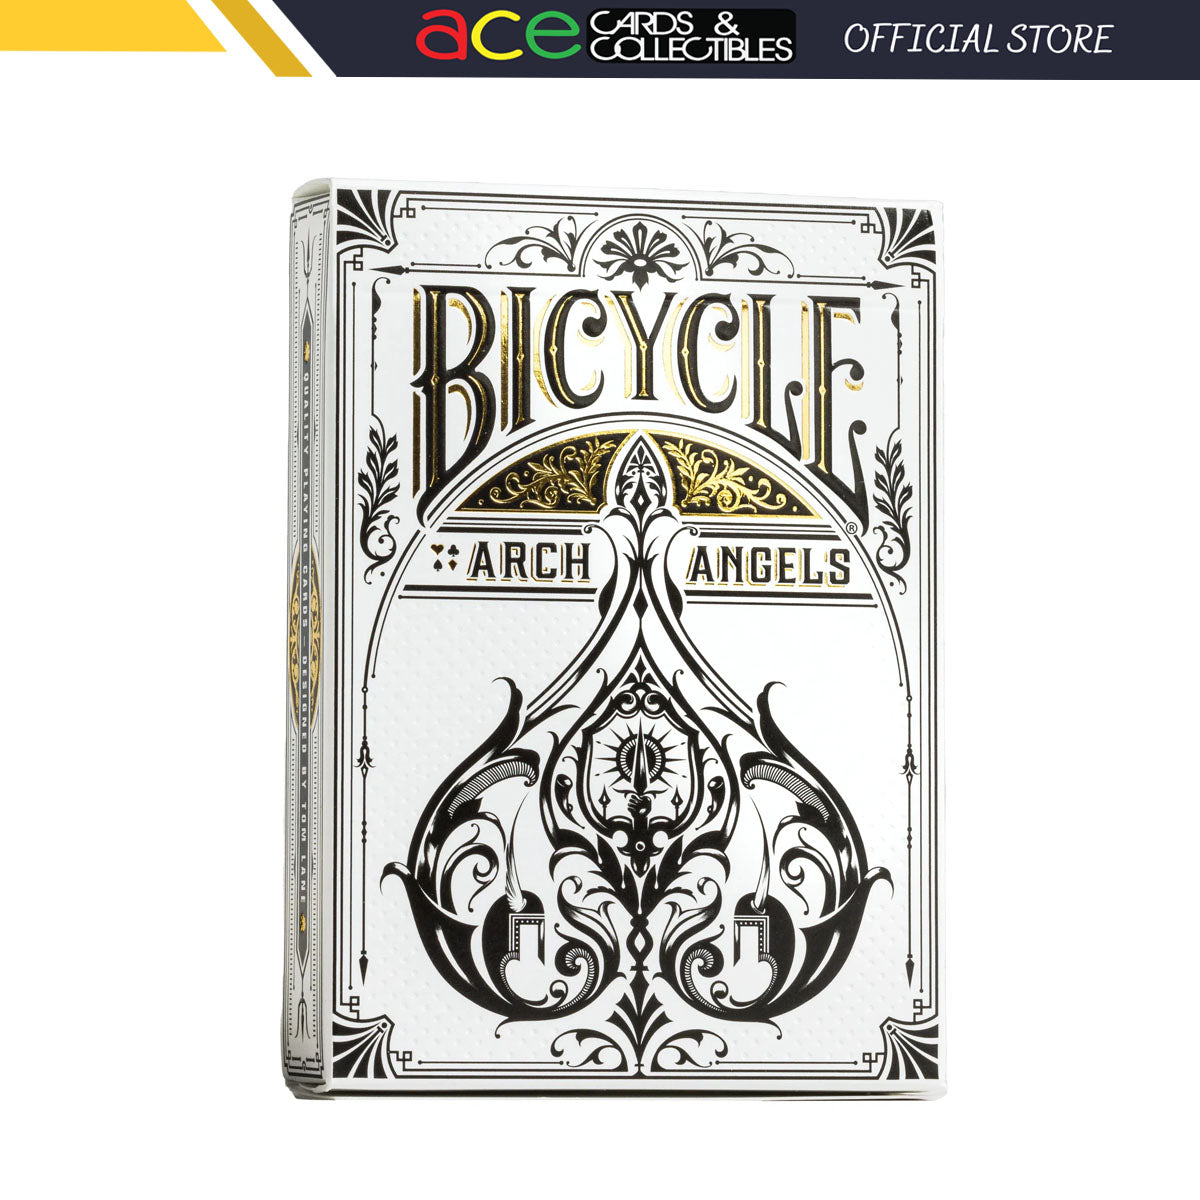 Bicycle Archangels Playing Cards-United States Playing Cards Company-Ace Cards & Collectibles